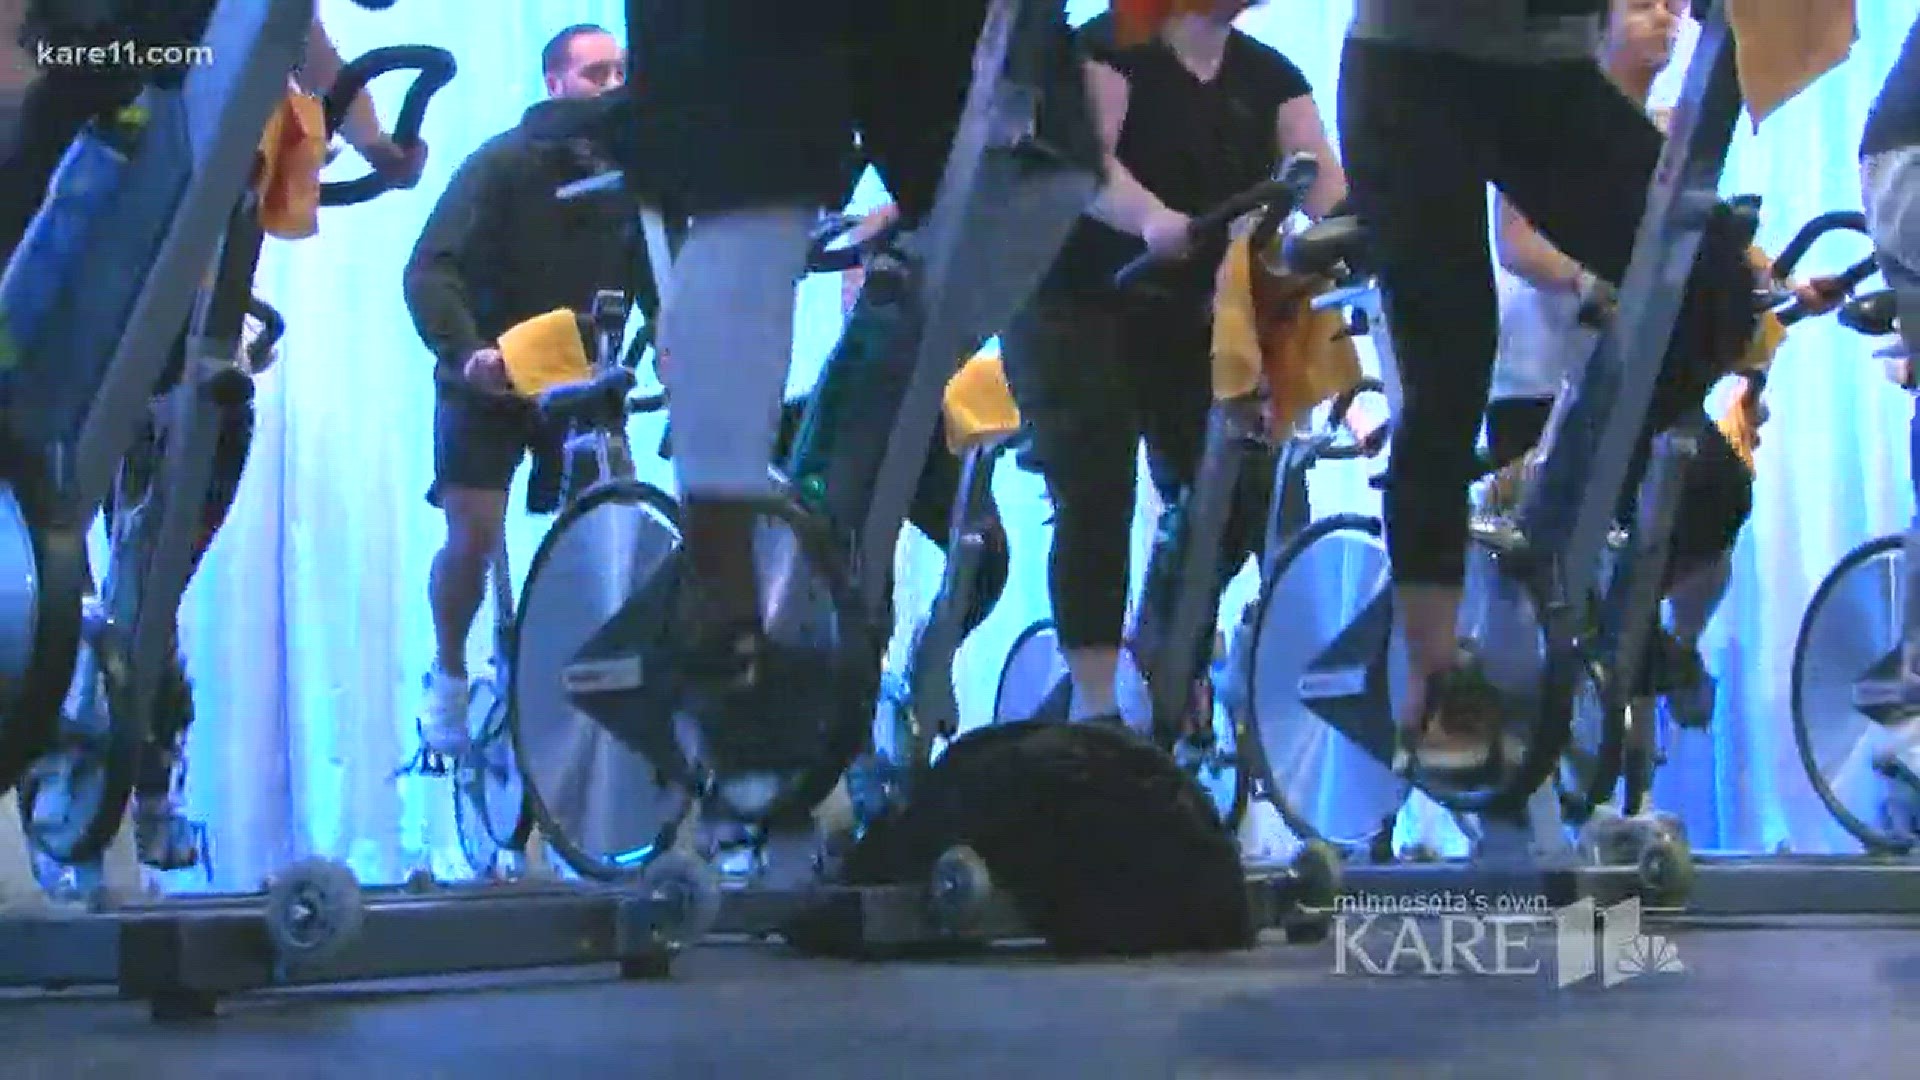 A new spin on spinning kare11